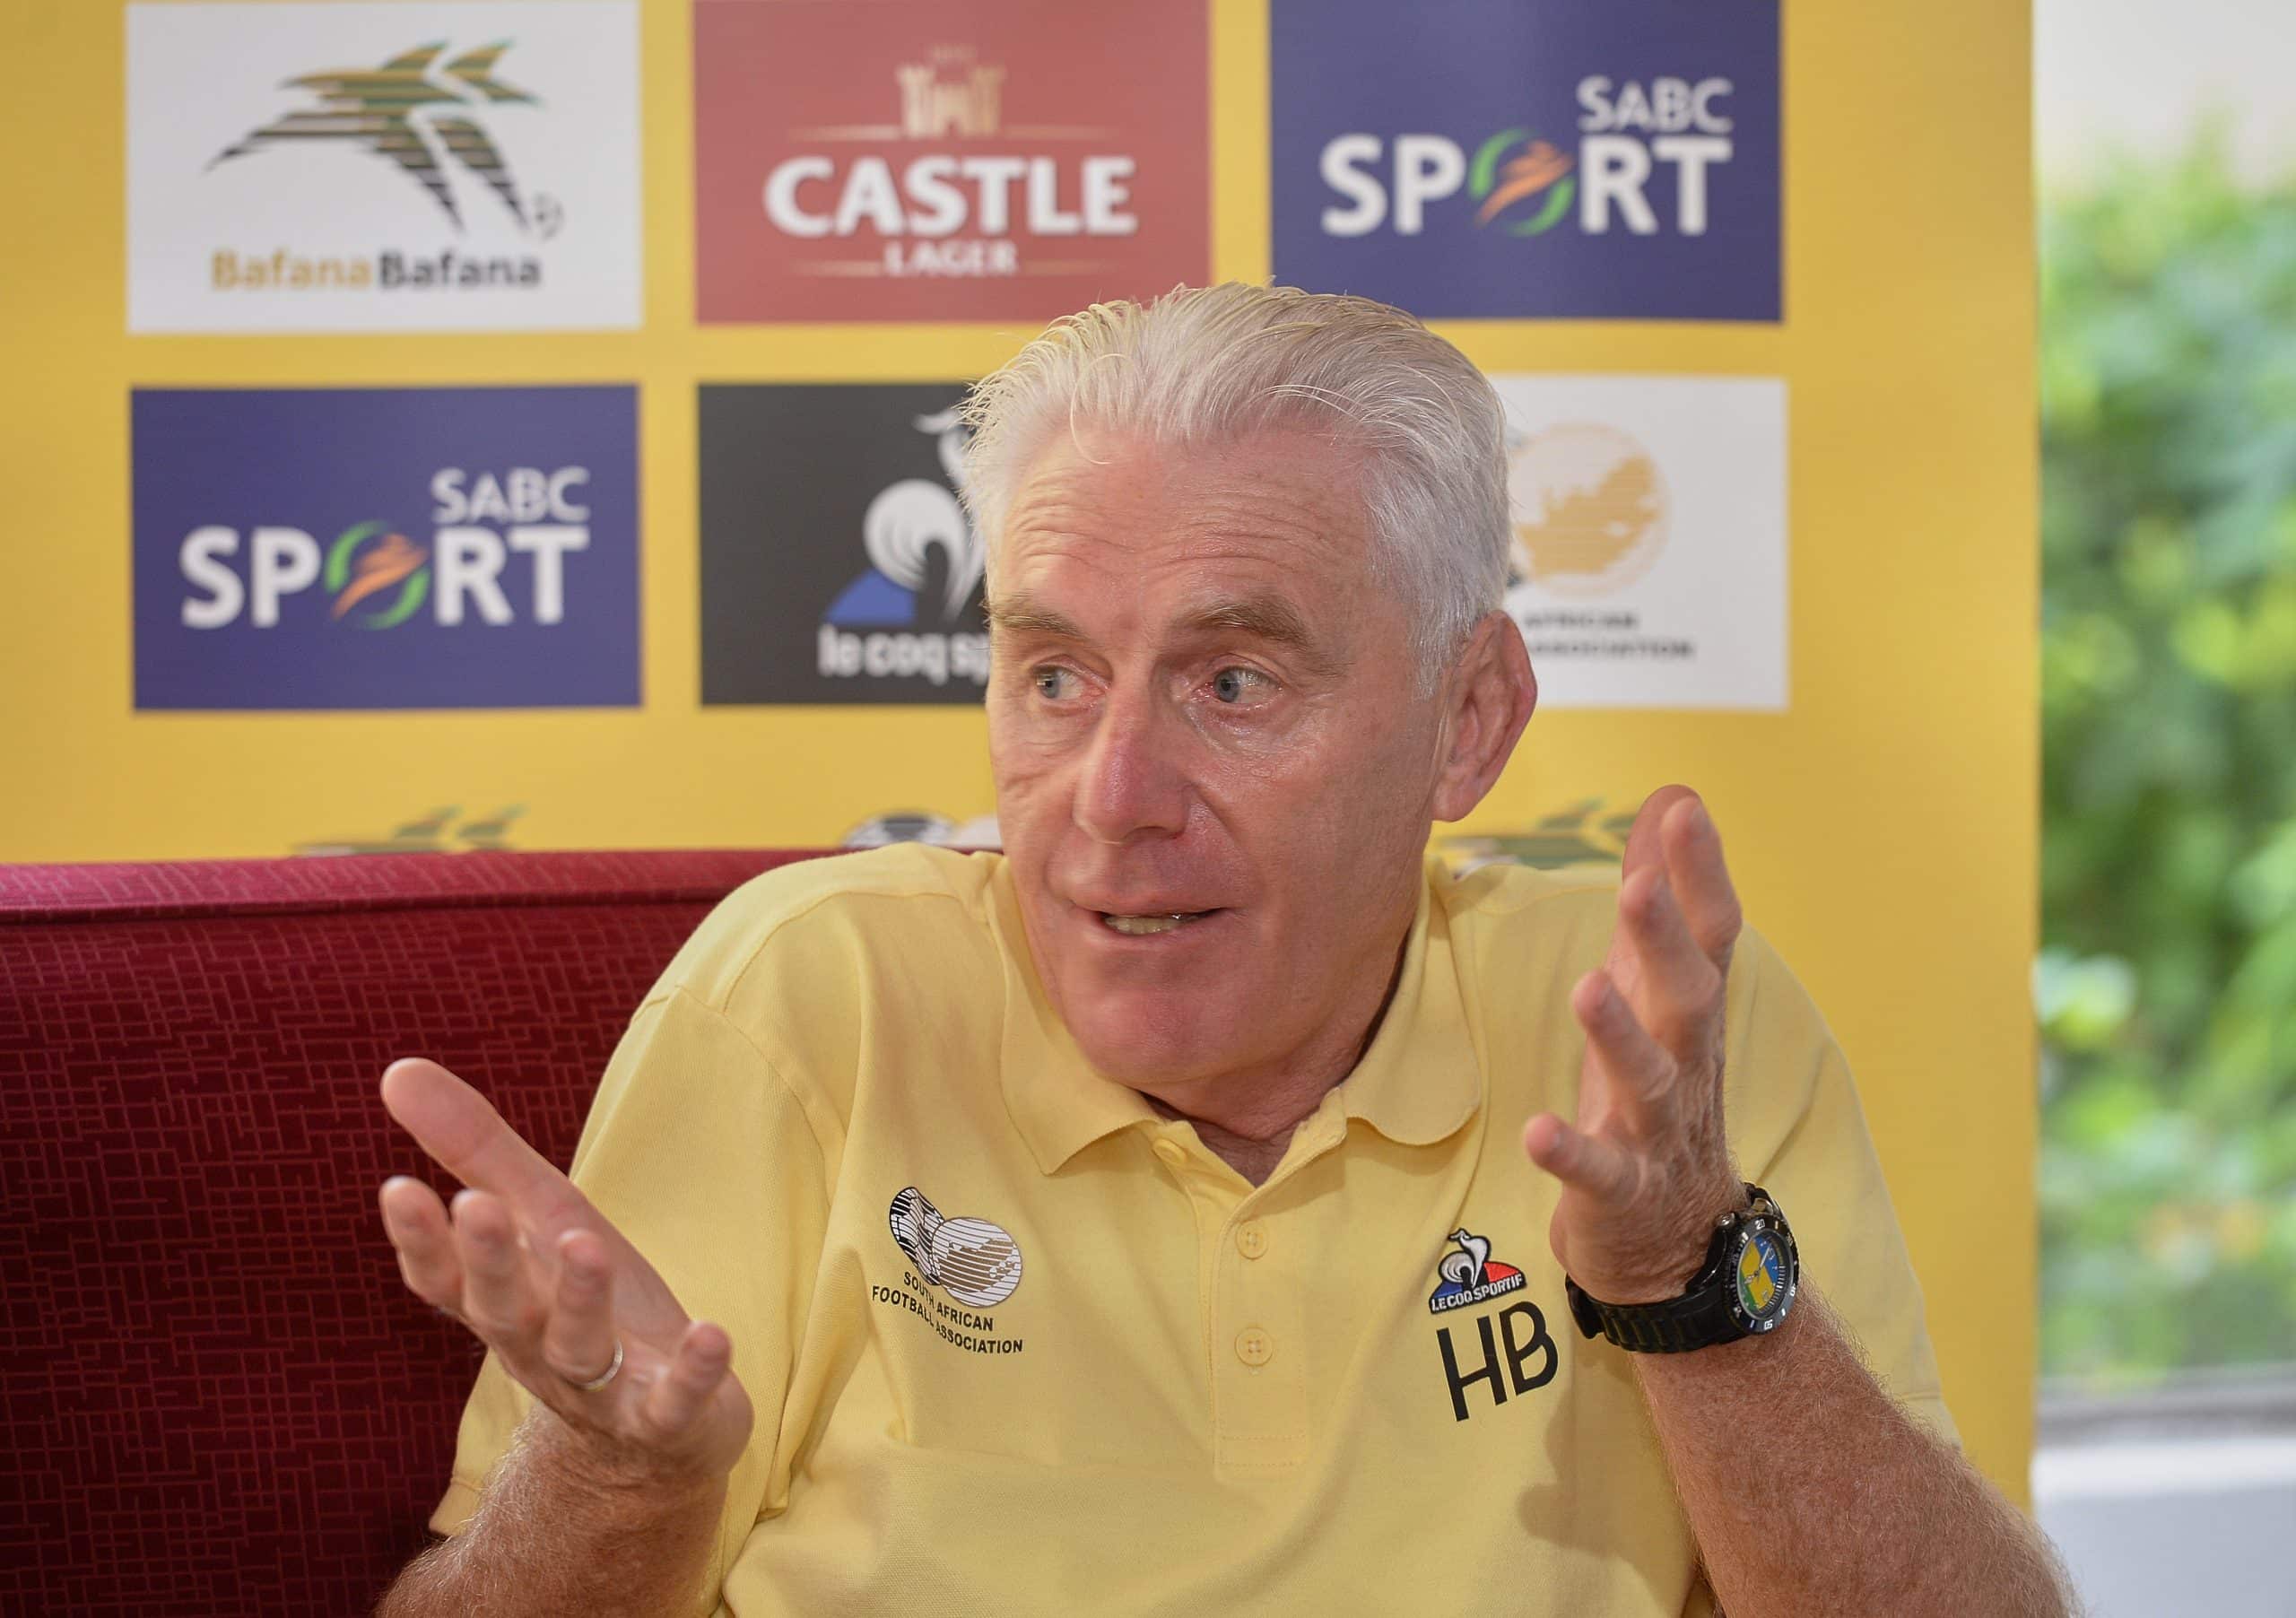 You are currently viewing Watch: Bafana coach Broos rips into SA football